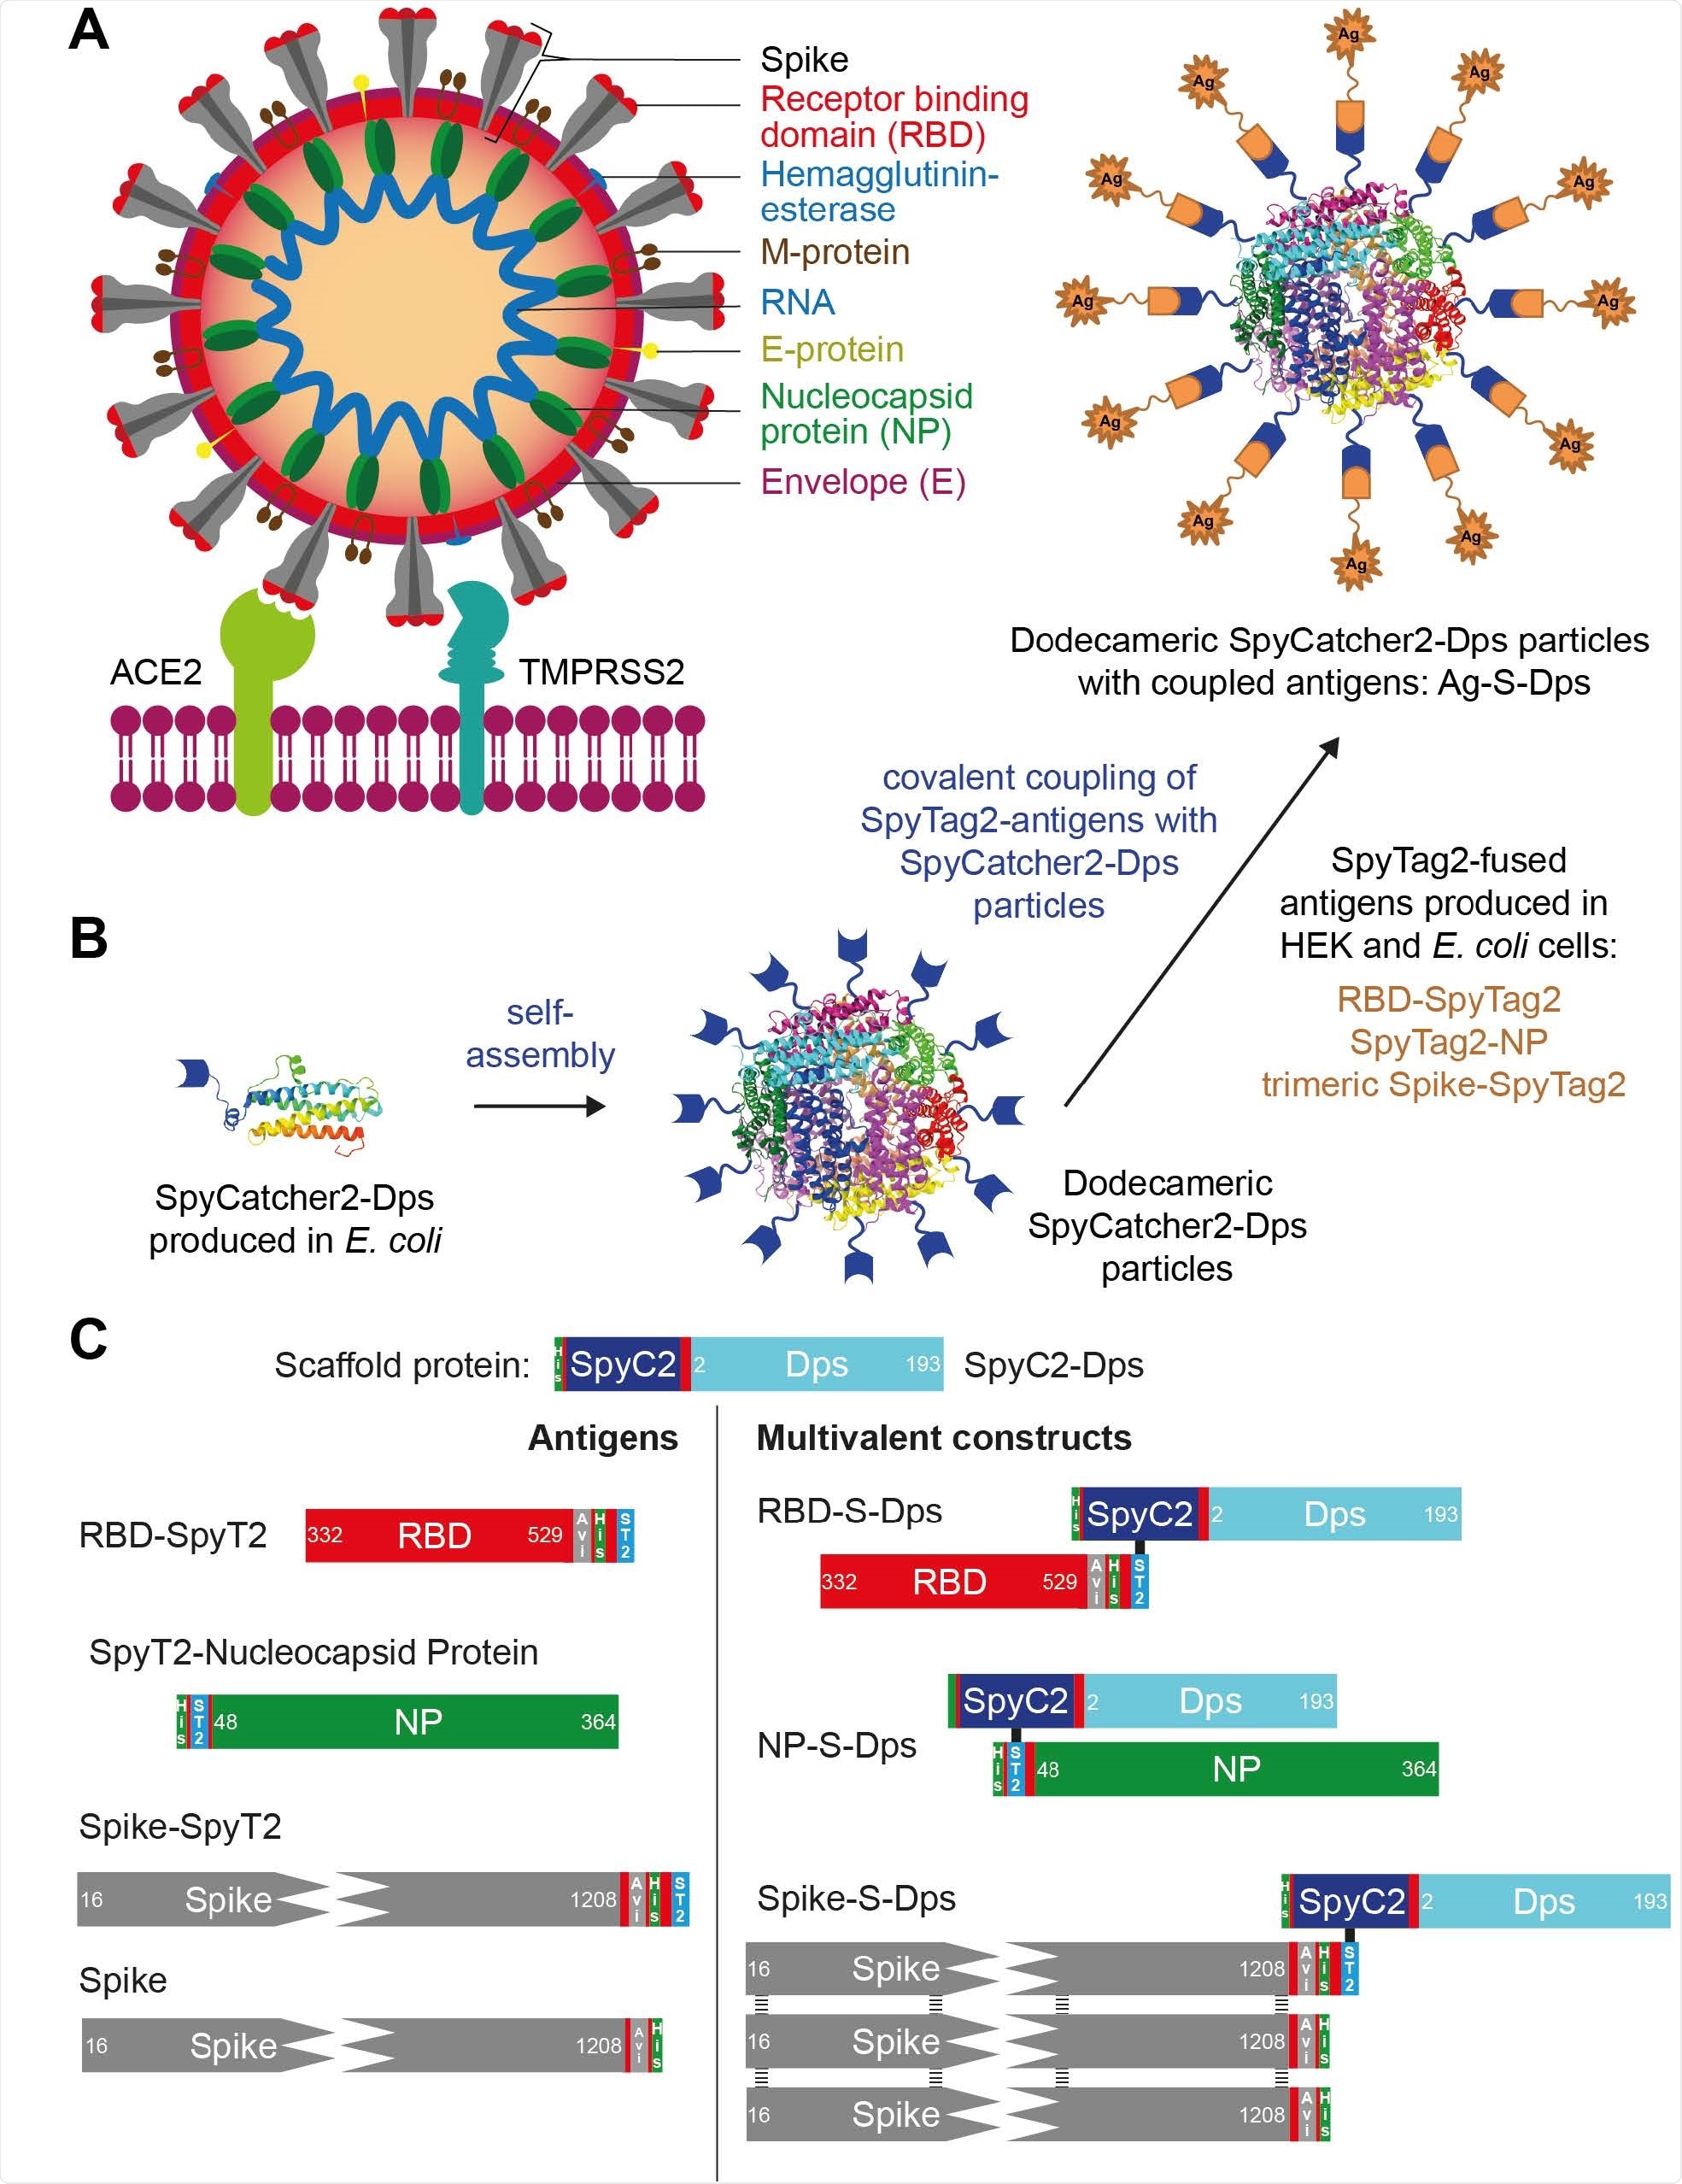 Overview of the multimerisation strategy employed and the antigens and scaffold used. A) Cartoon representation of SARS-CoV-2 binding to a human cell membrane. B) Schematic diagram of the Sulfolobus islandicus Dps and SpyCatcher2-based display and multimerisation strategy employed in this study. C) Diagram of the proteins used in this work. SpyC2 is the SpyCatcher2 domain and SpyT2 is the peptidic SpyTag2 that becomes covalently linked to SpyC2 upon simple mixing. Stabilised, trimeric Spike/Spike-SpyT2 contained on average only one SpyT2 tag in order to avoid uncontrolled oligomerisation when coupled to Dps.